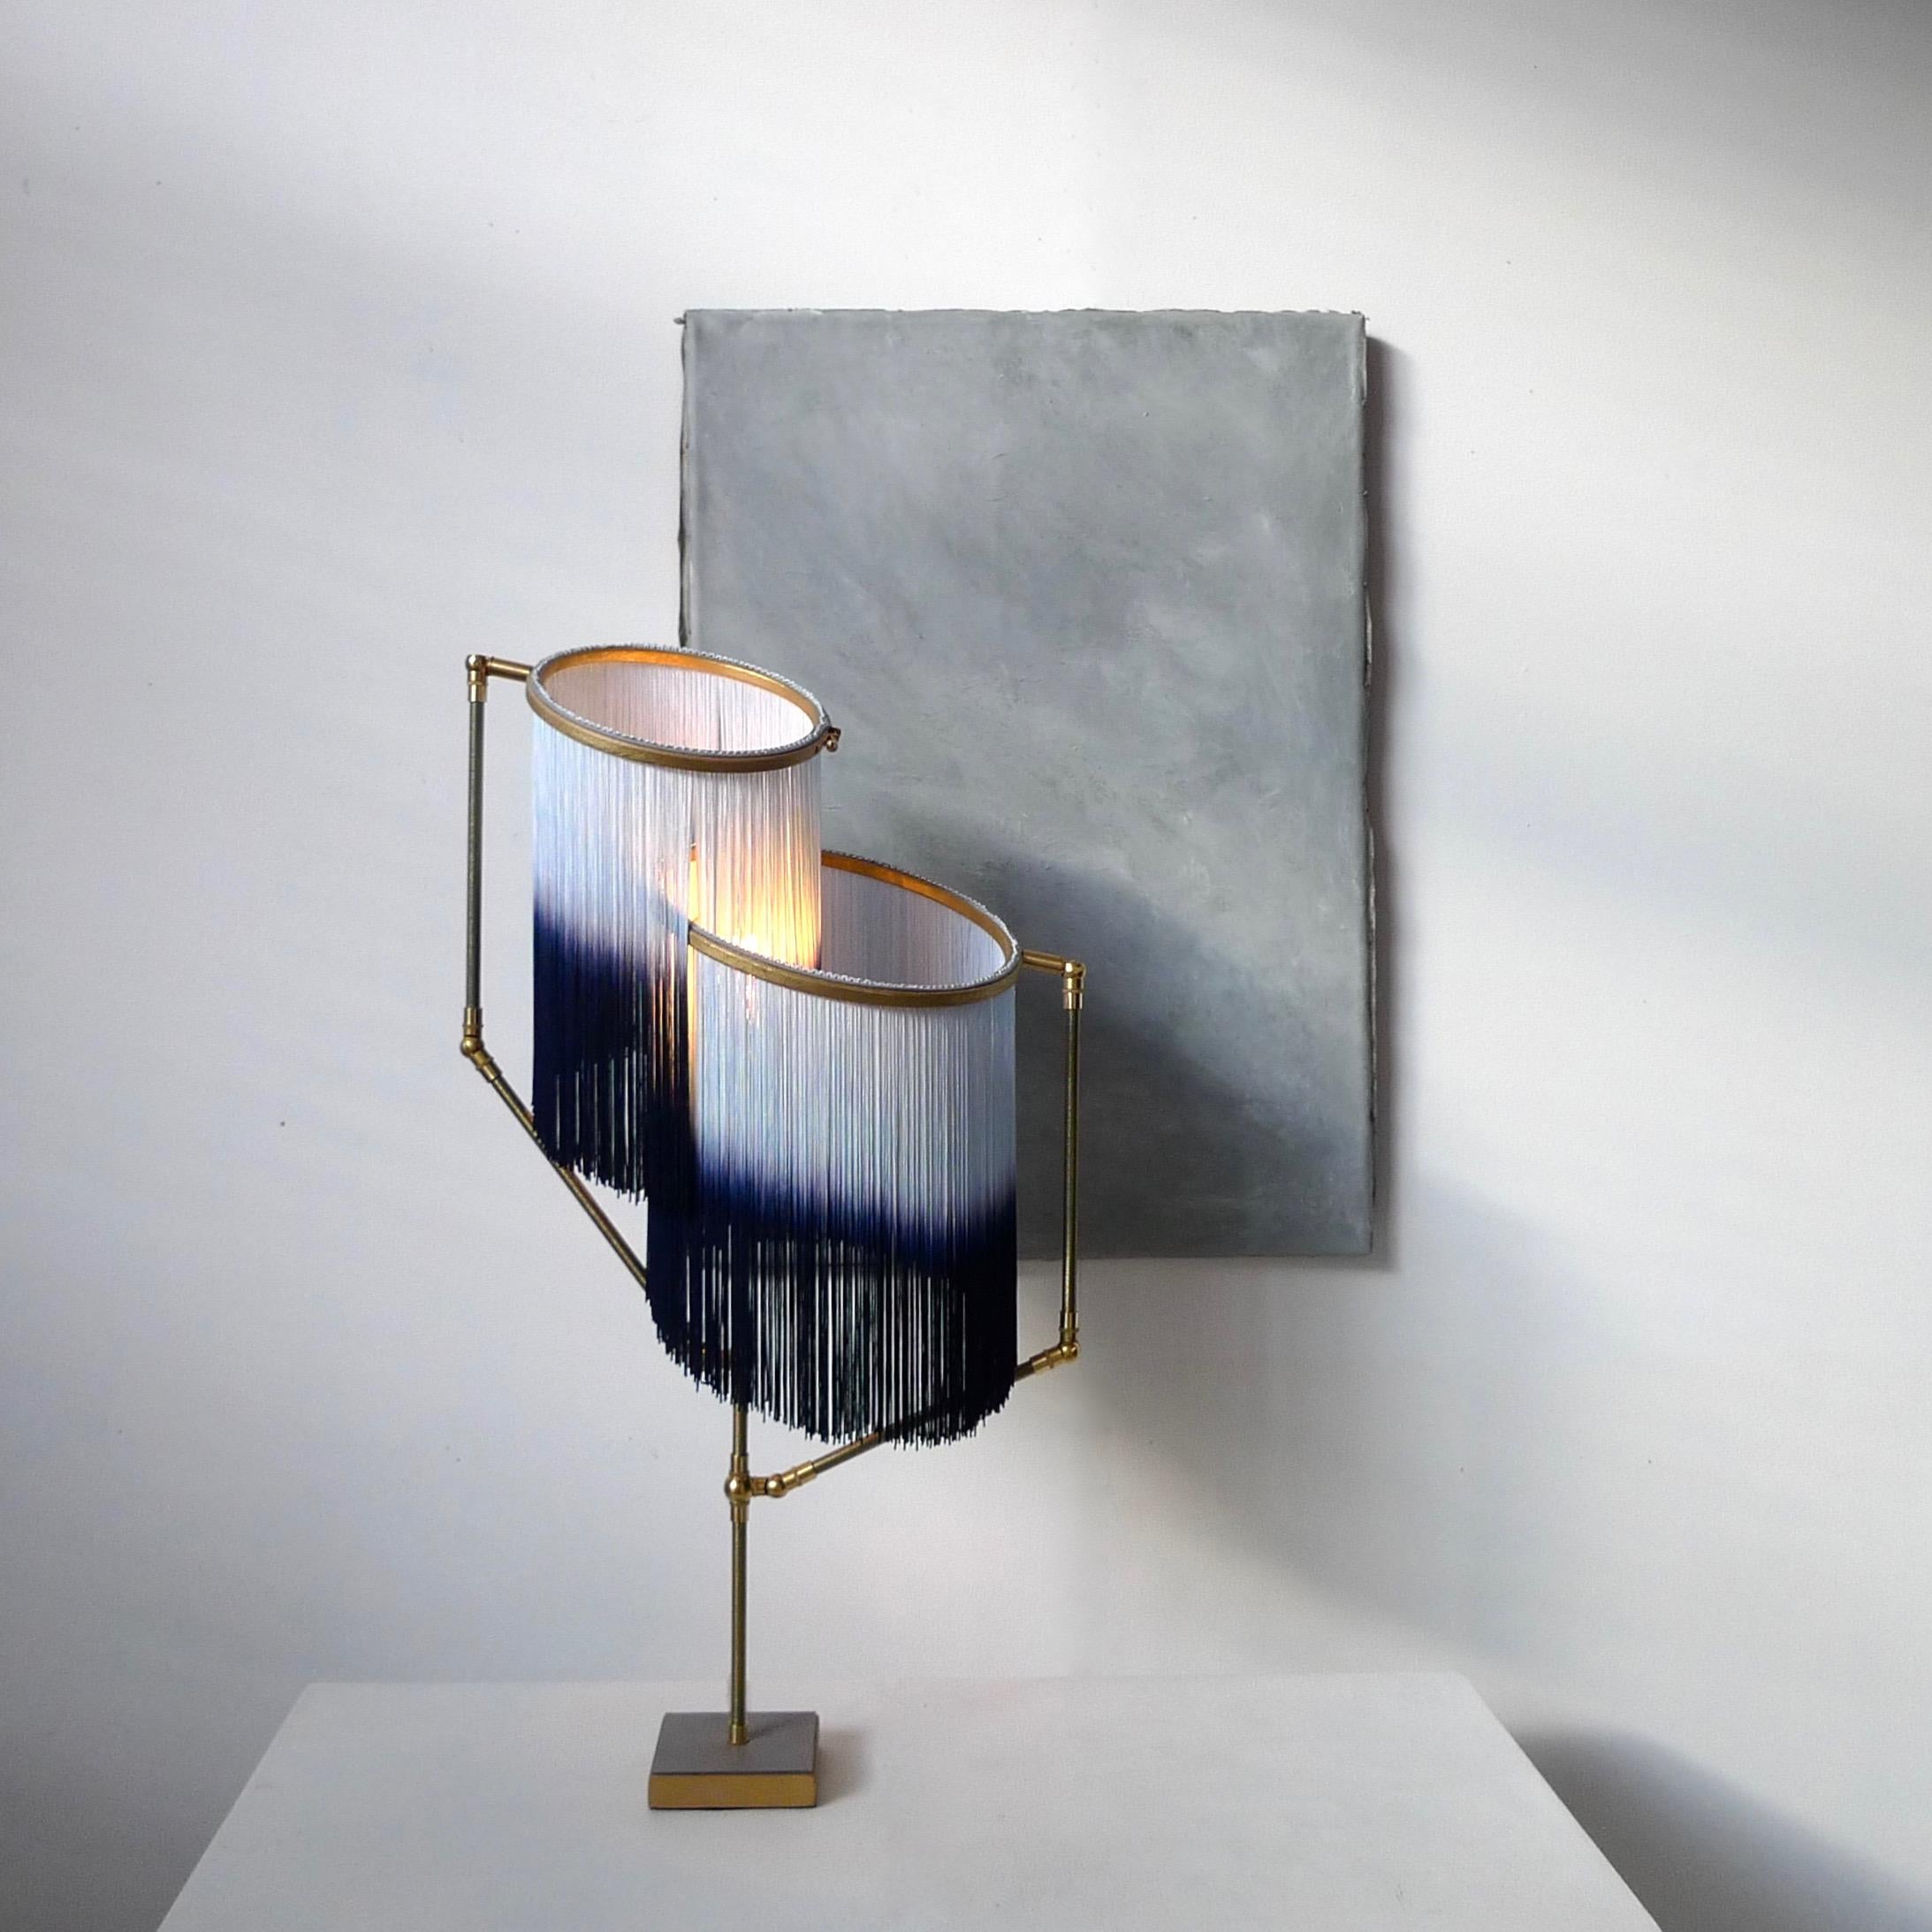 Blue Charme table lamp, Sander Bottinga

Dimensions: H 73 x W 38 x D 25 cm
Handmade in brass, leather, wood and dip dyed colored Fringes in viscose.
The movable arms makes it possible to move the circles with fringes in different positions.
So